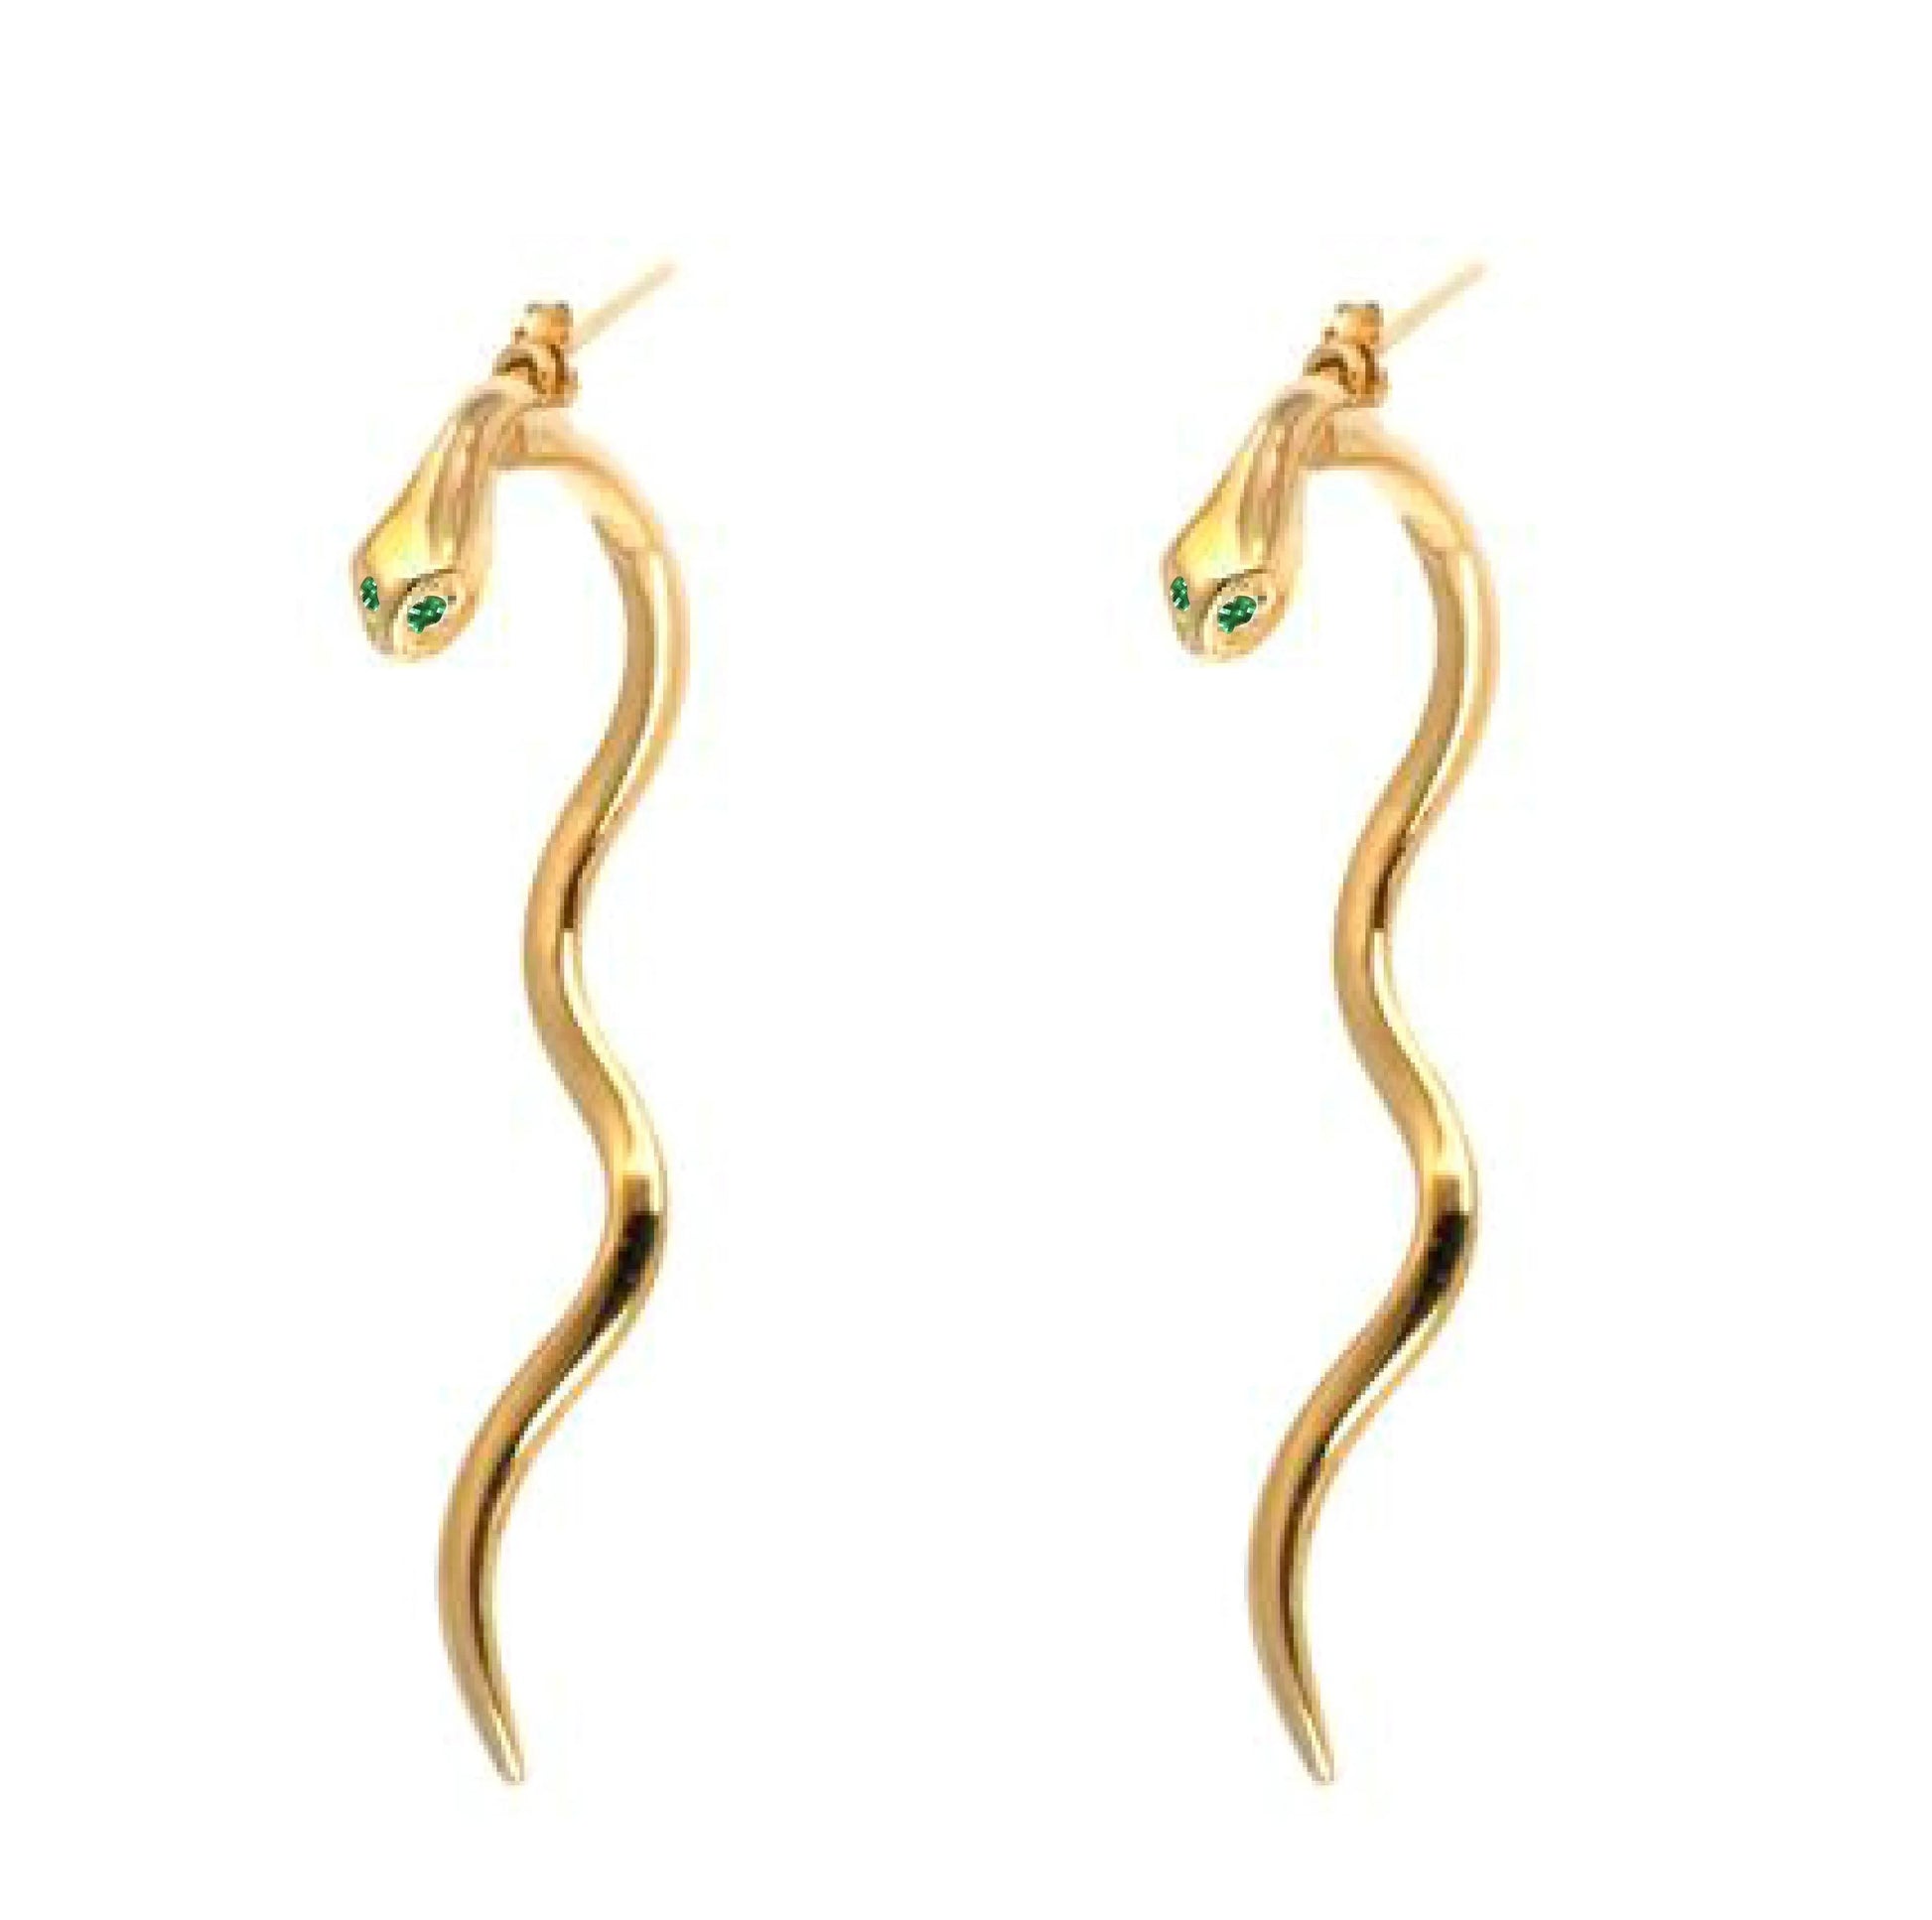 Long Gold Plated Snake Earrings - Squash Blossom Vail